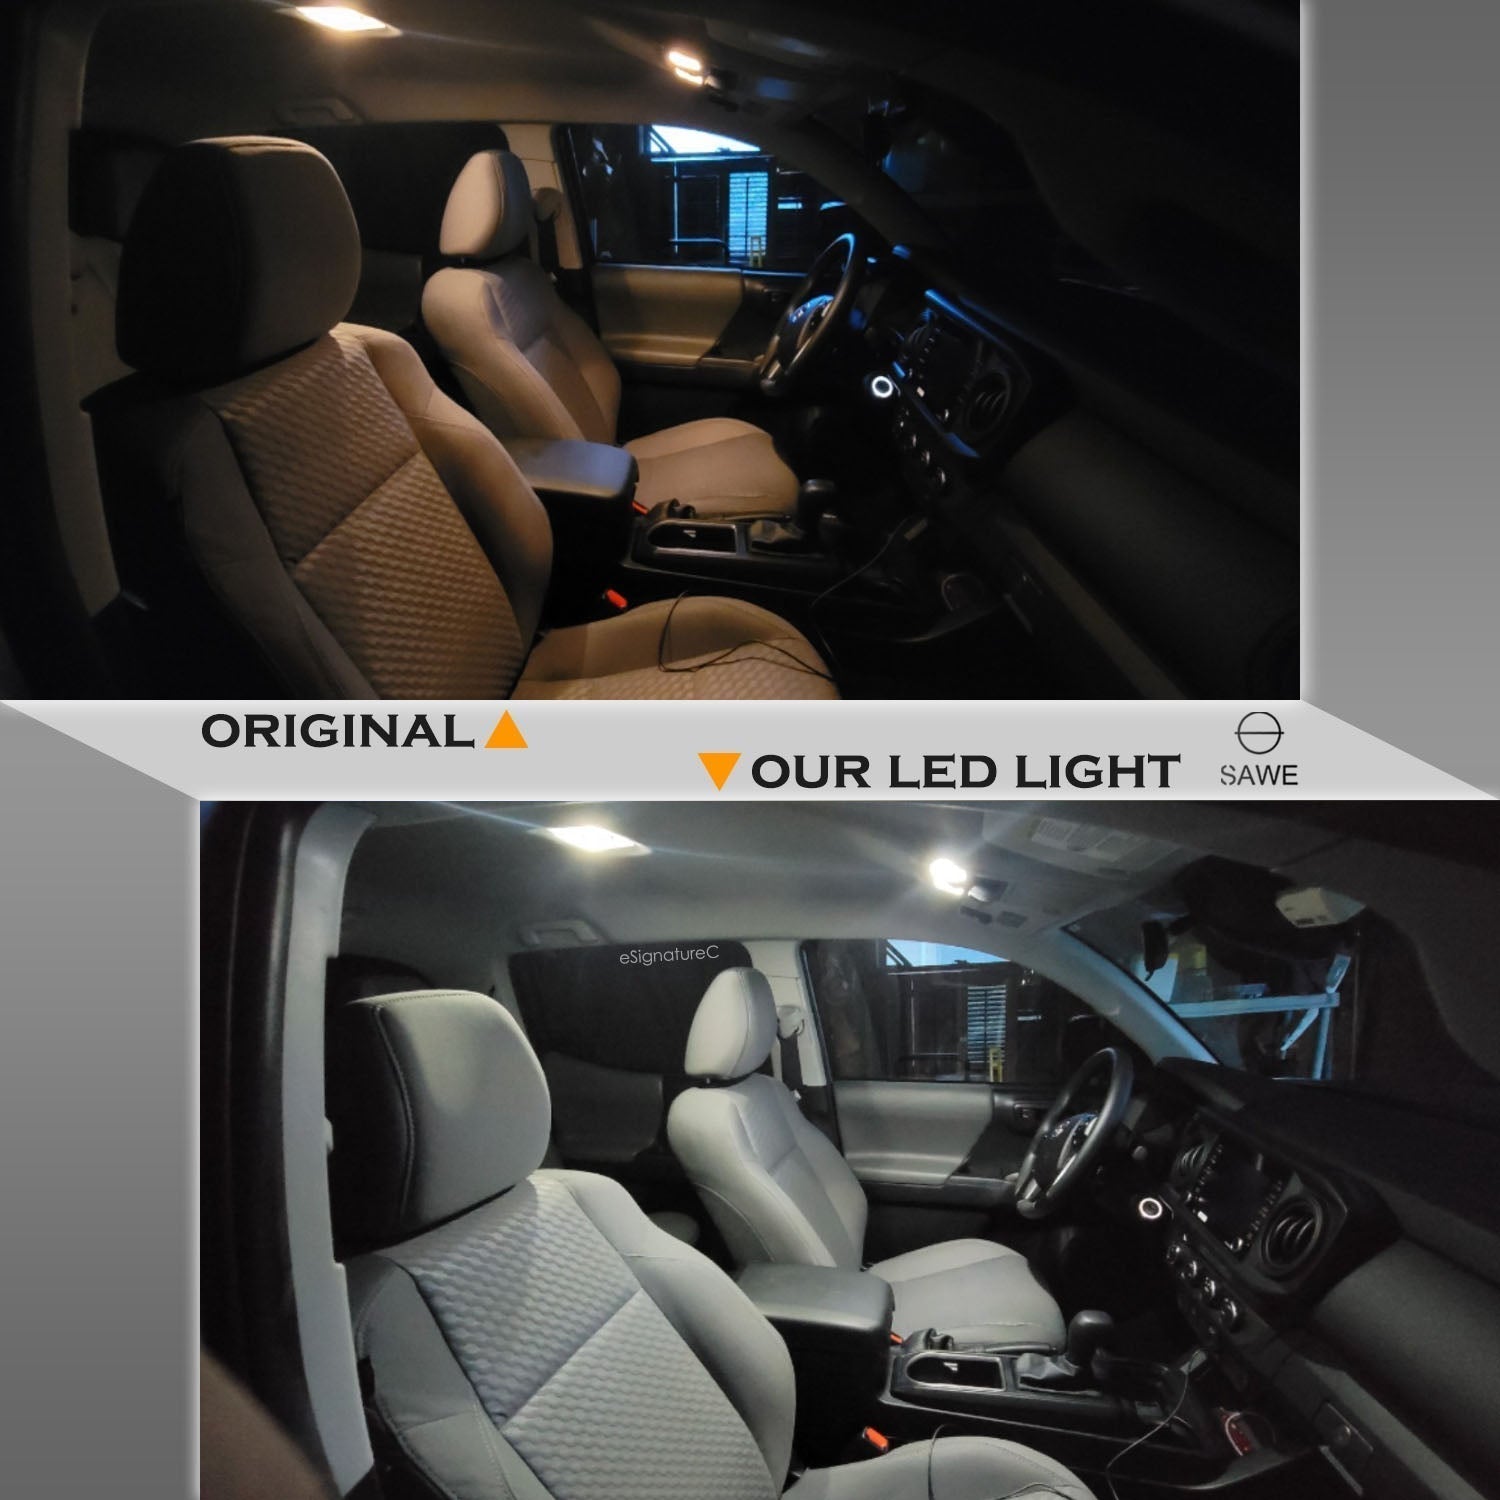 For Chevrolet Equinox Interior LED Lights - Dome & Map Lights Package Kit for 2010 - 2017 - White